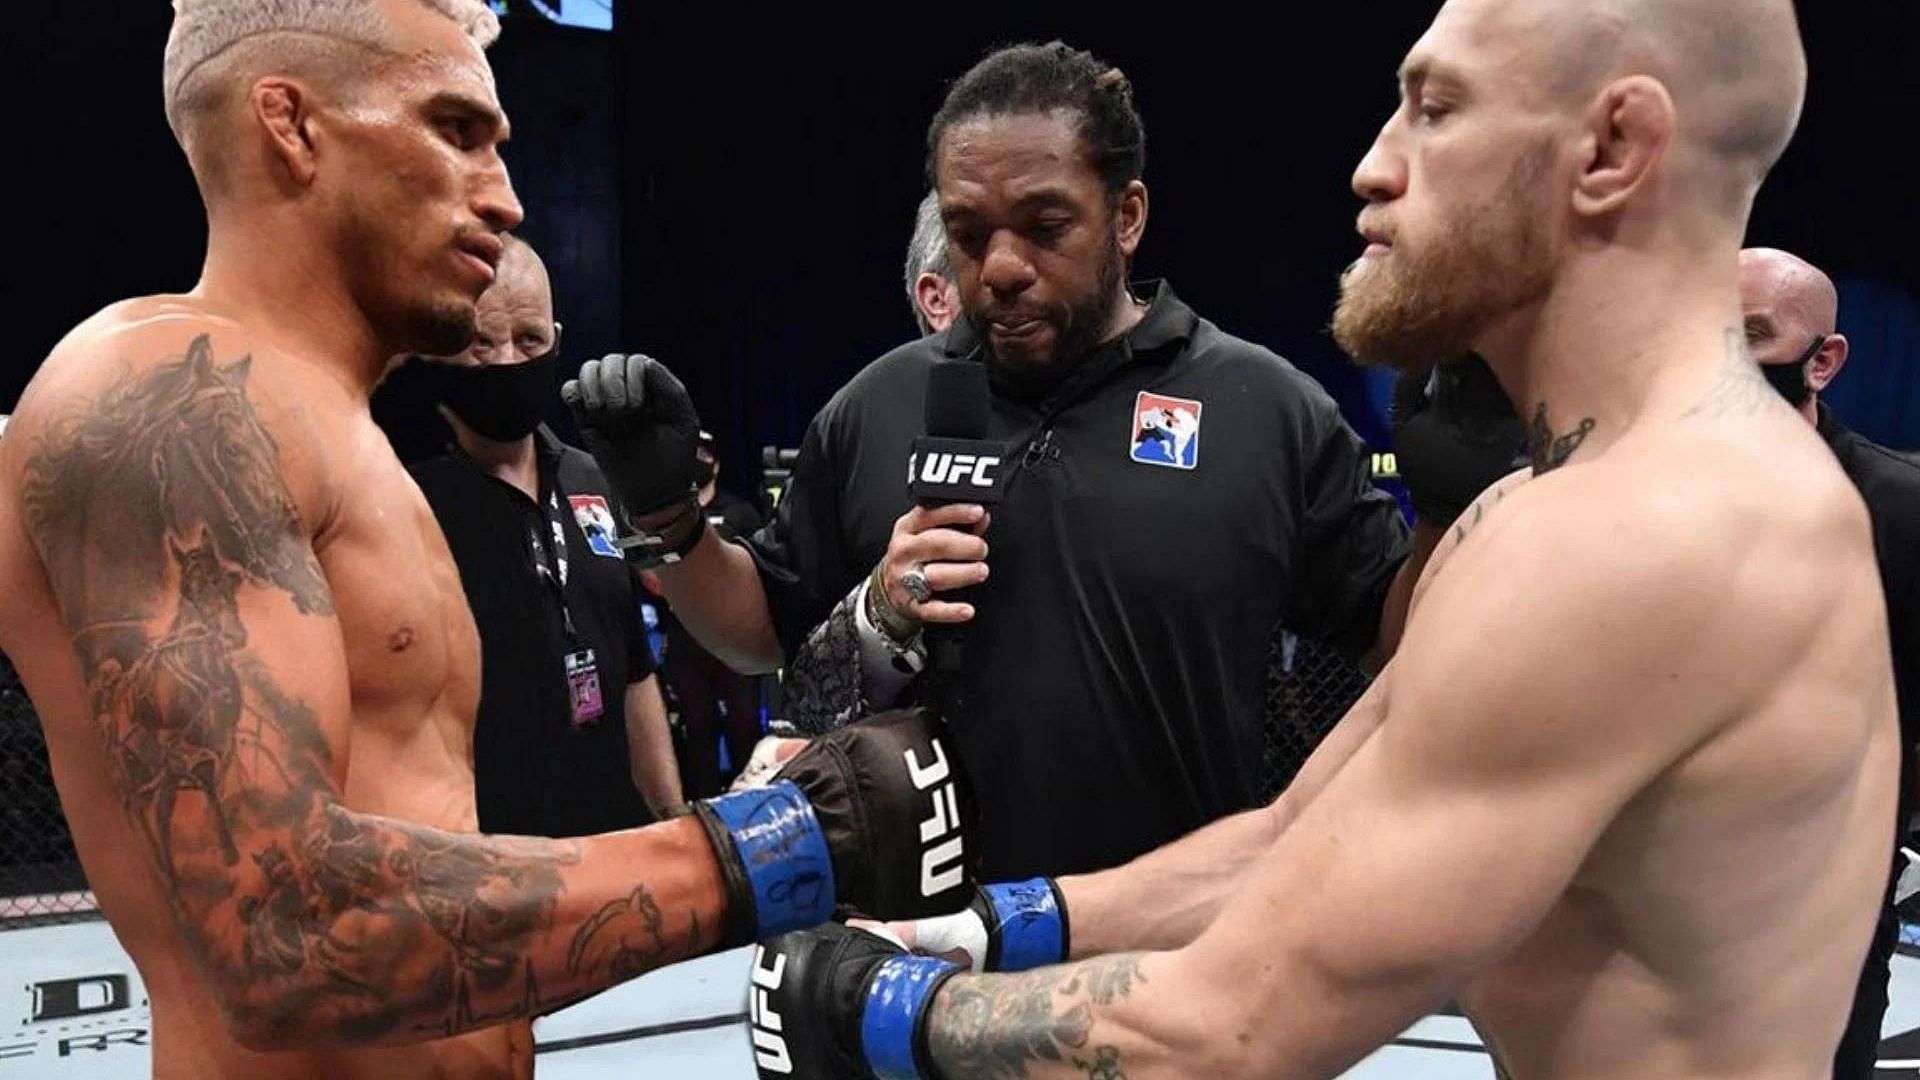 The UFC should avoid booking a lightweight title bout between Charles Oliveira and Conor McGregor in 2022